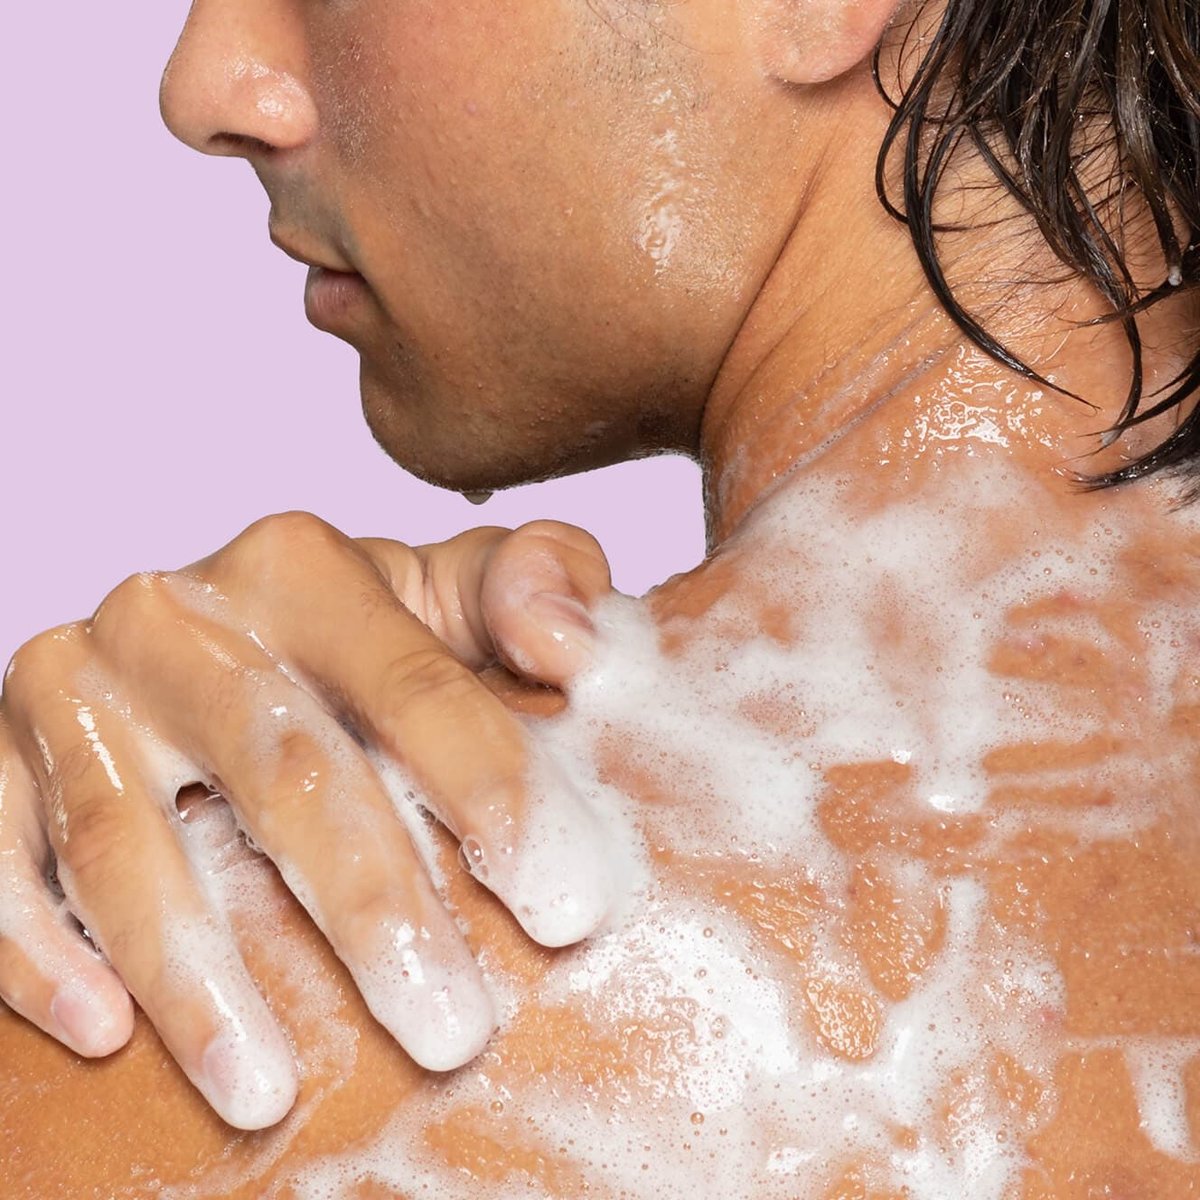 Wet teen back and neck with foaming body wash